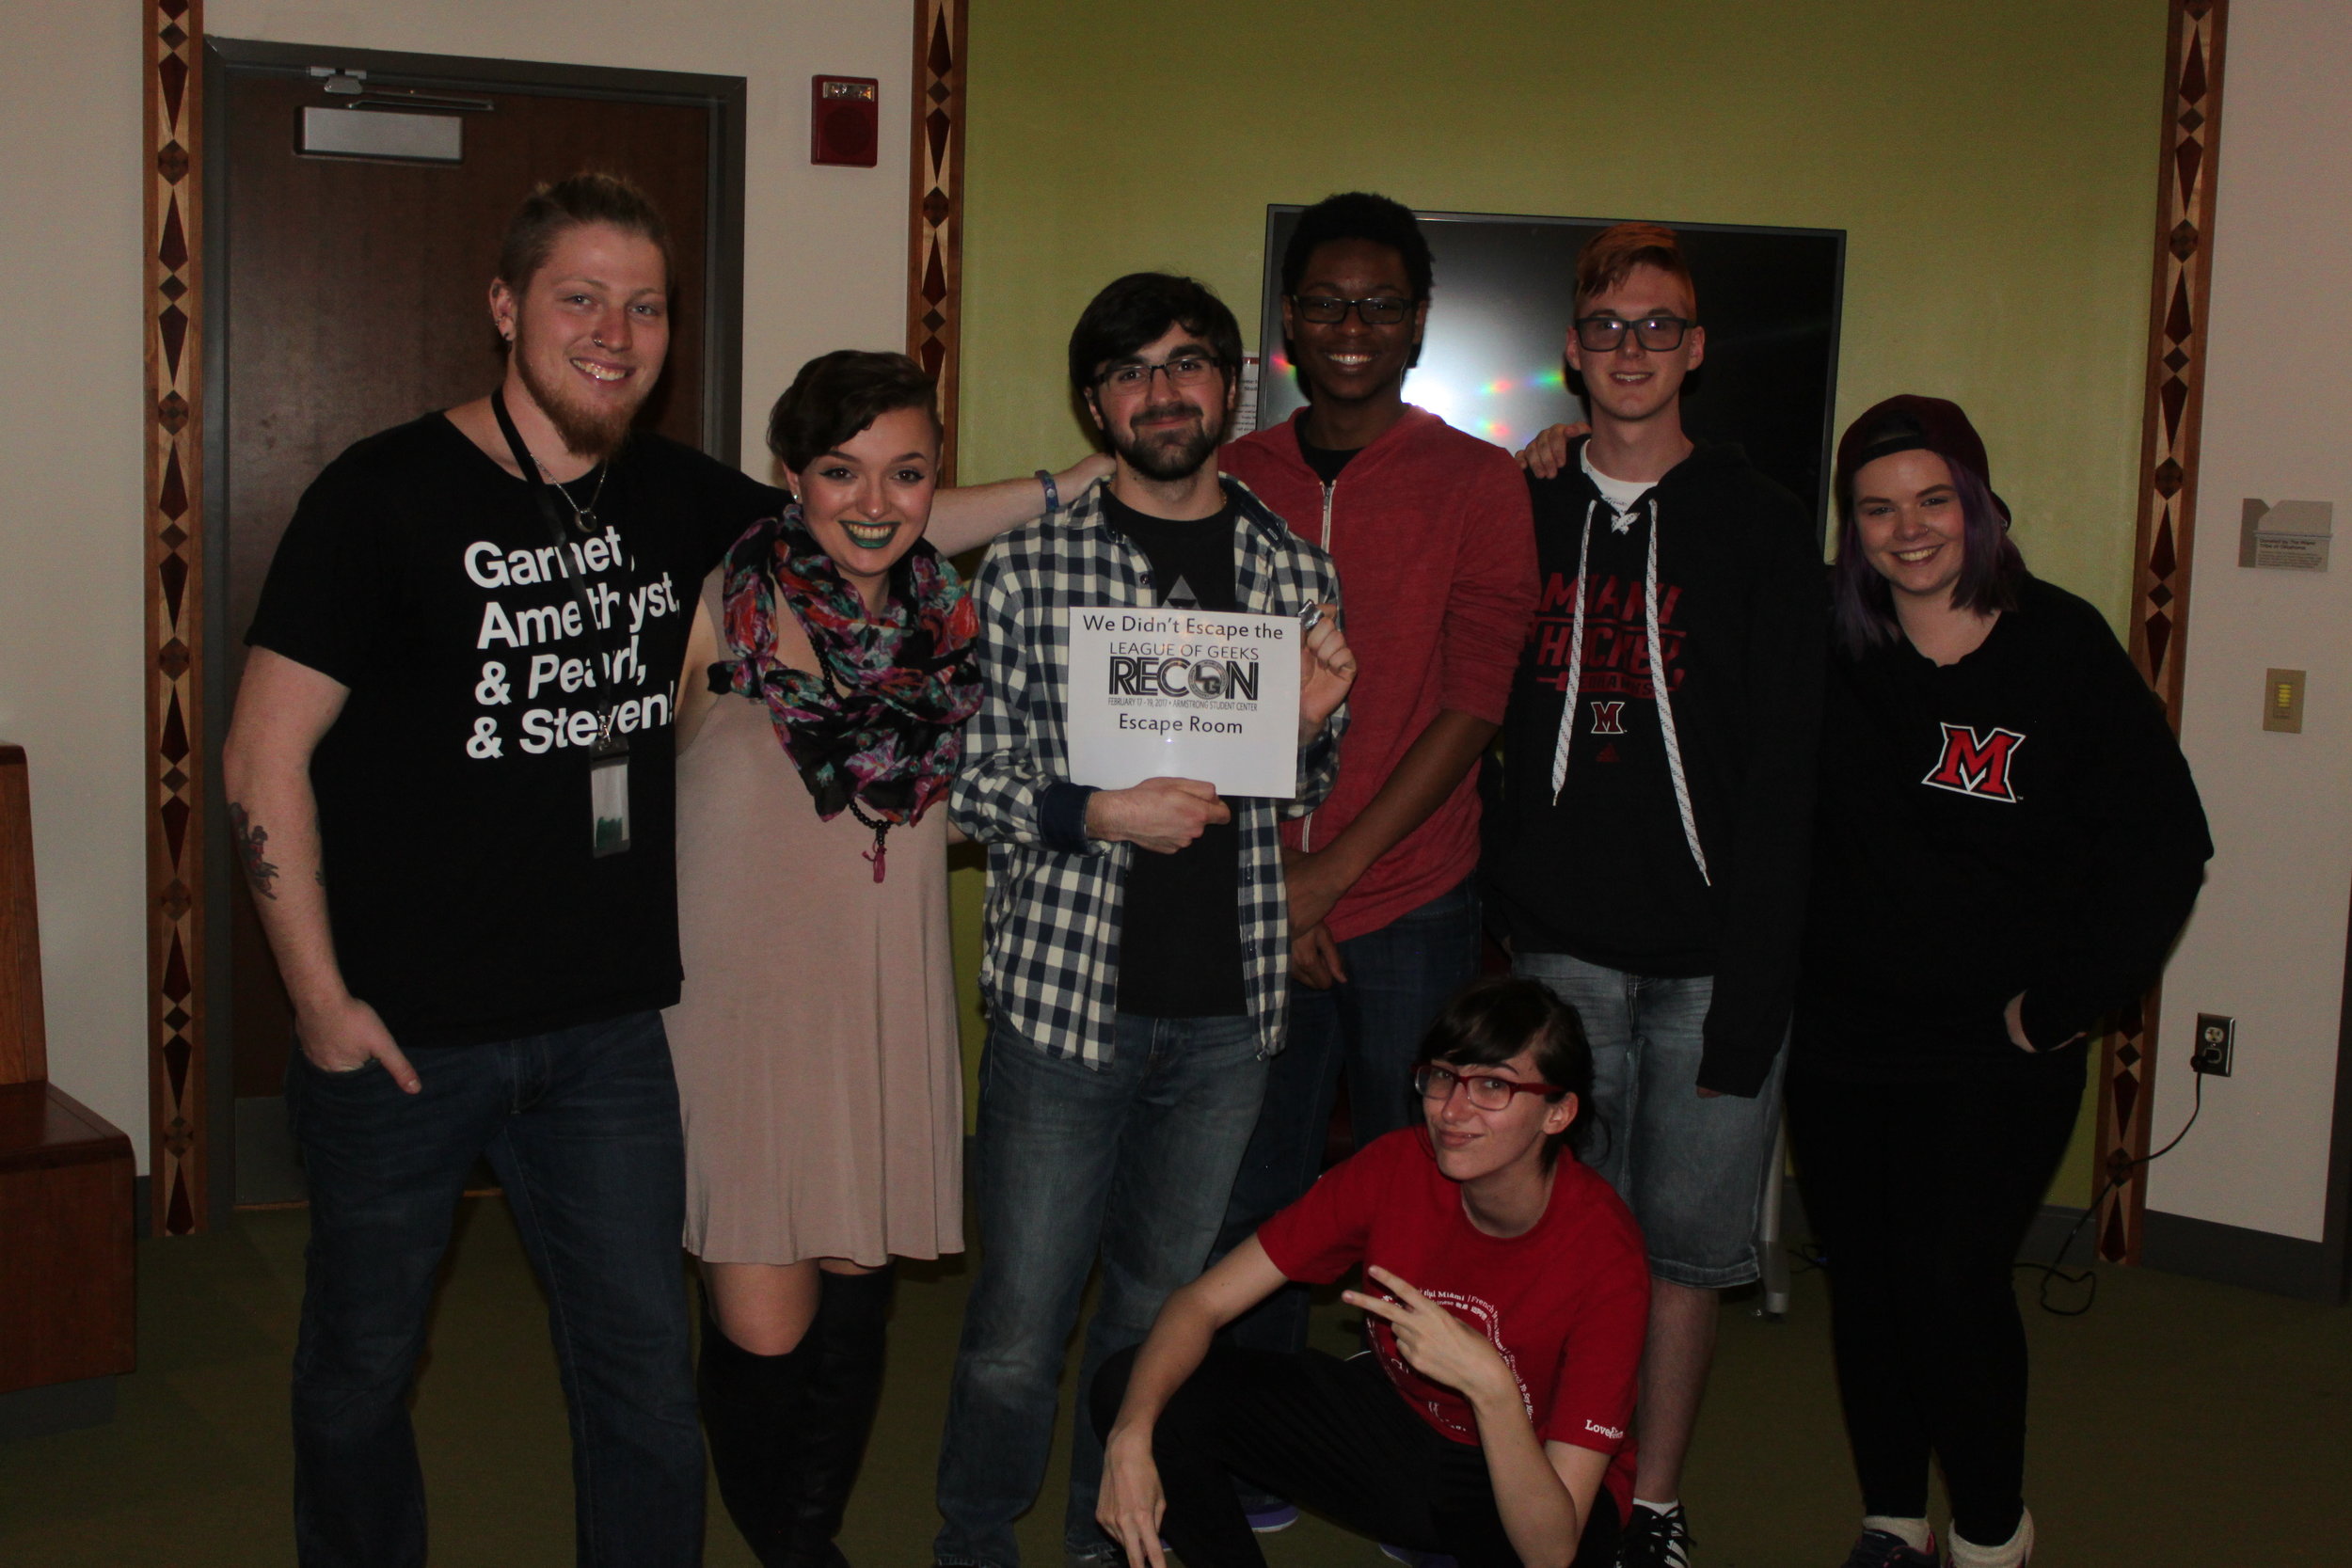 A group of people, one in the middle holding a piece of paper that says "we didn't escape the RECON escape room"